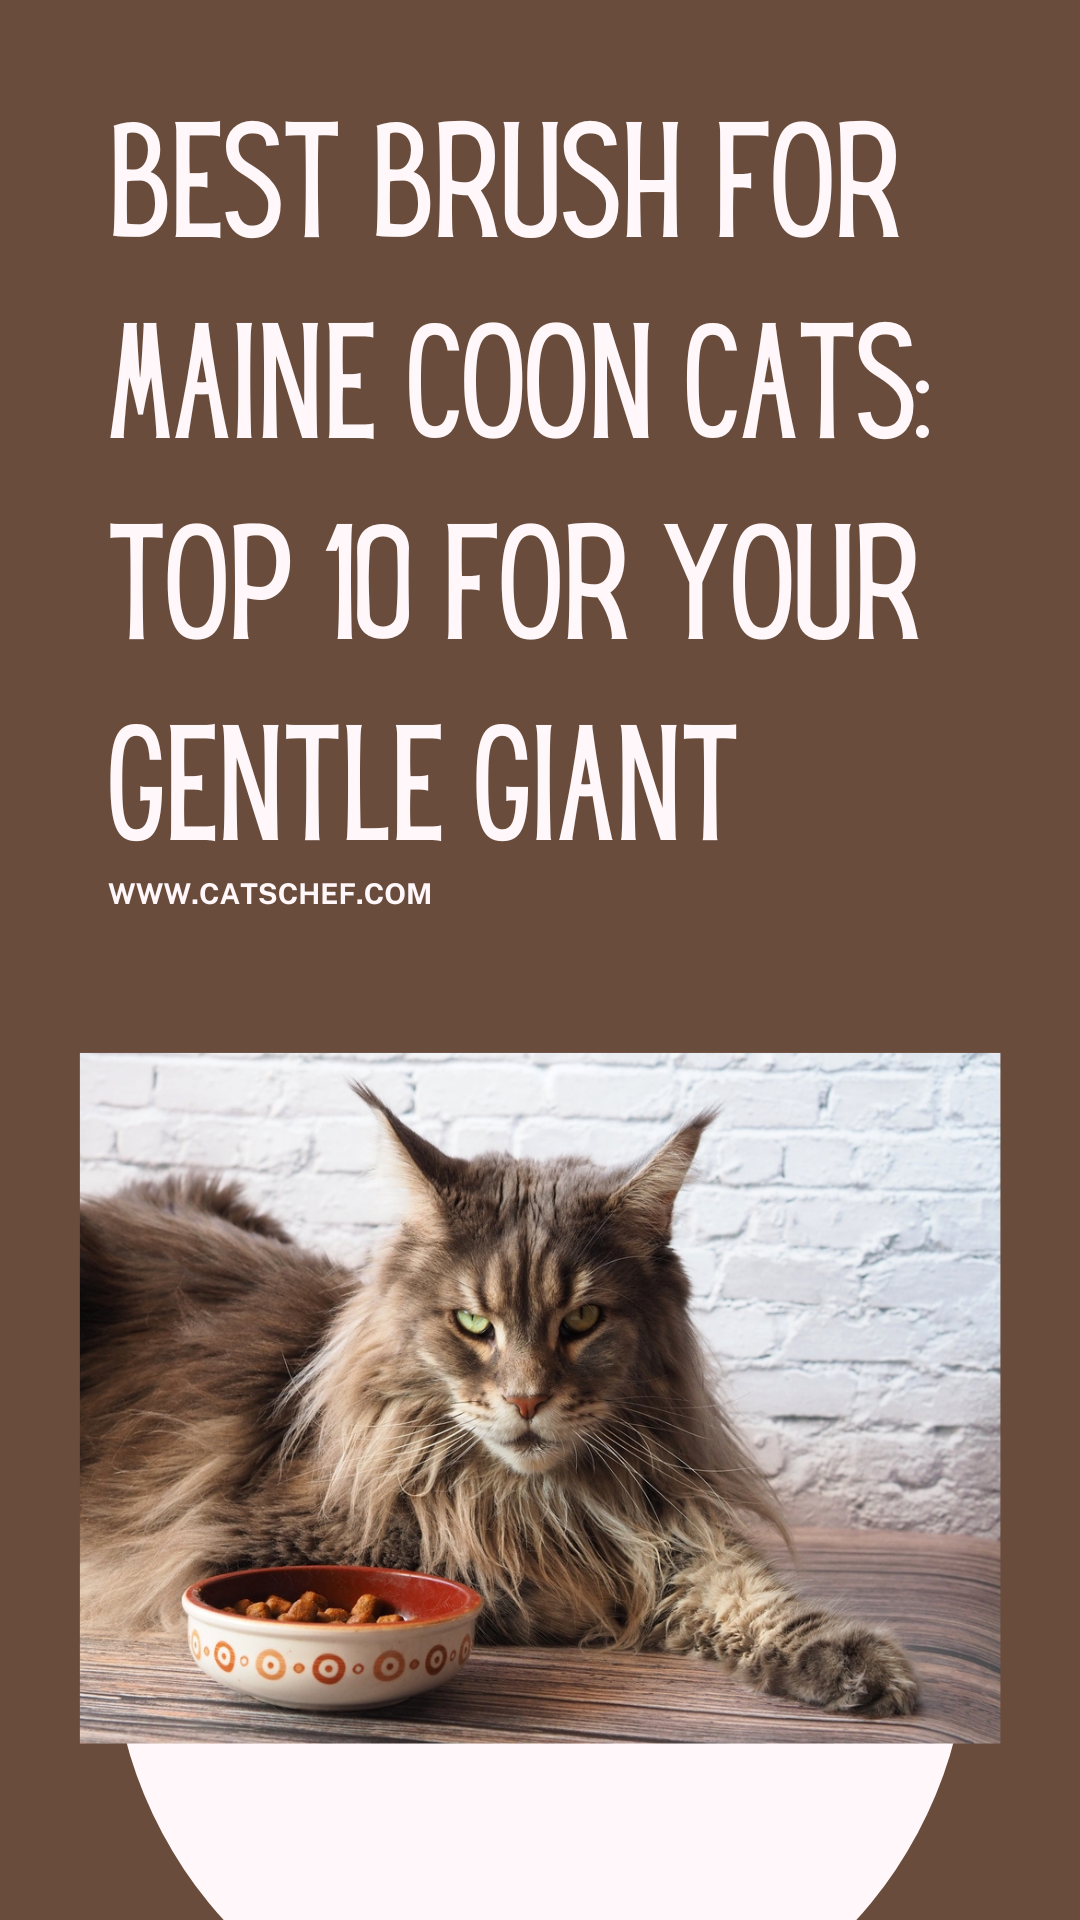 Best Brush For Maine Coon Cats: Top 10 For Your Gentle Giant